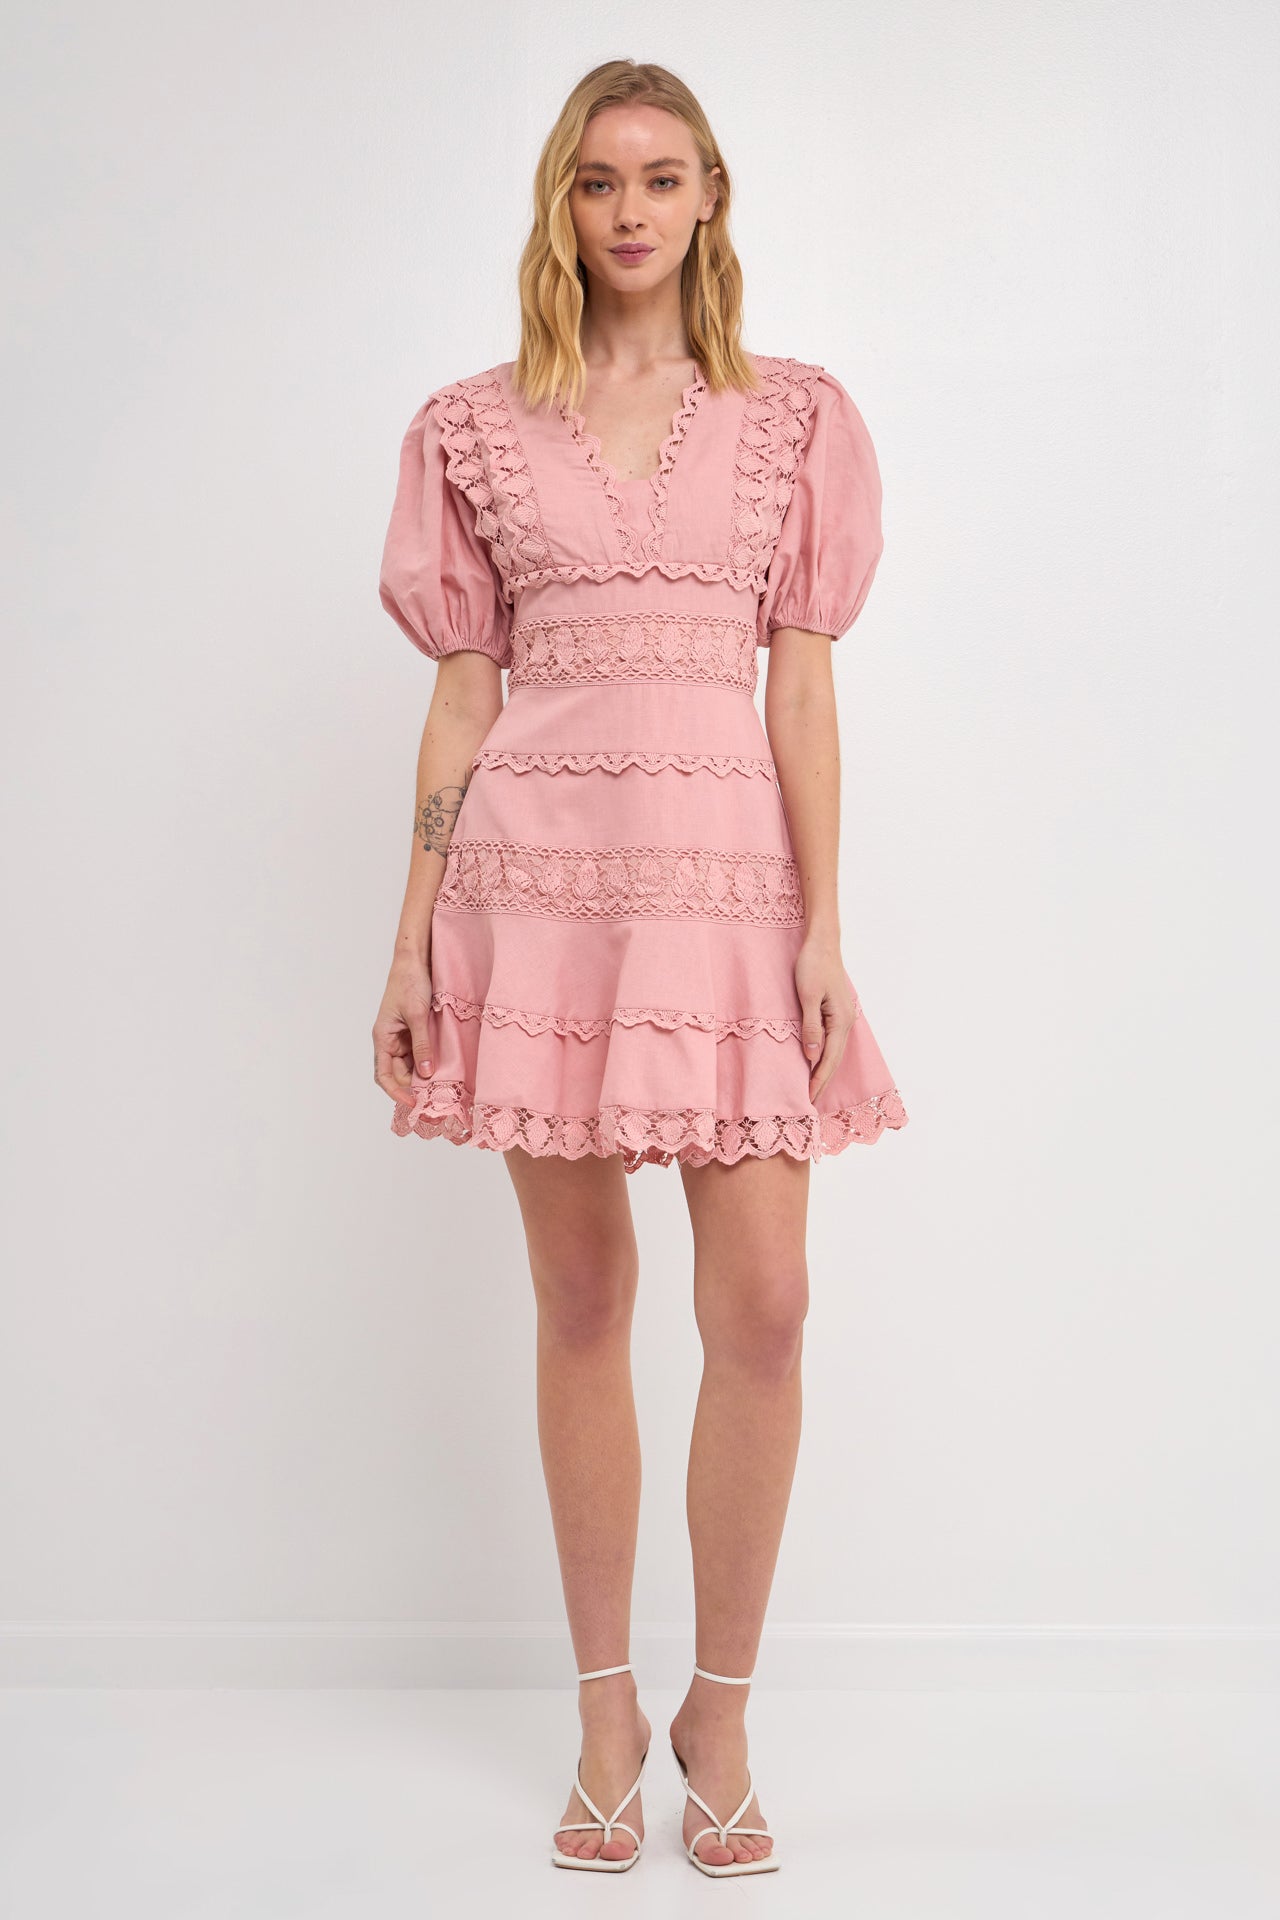 Endless Rose - Puff Sleeve Plunging Lace Dress - Dresses in Women's Clothing available at endlessrose.com